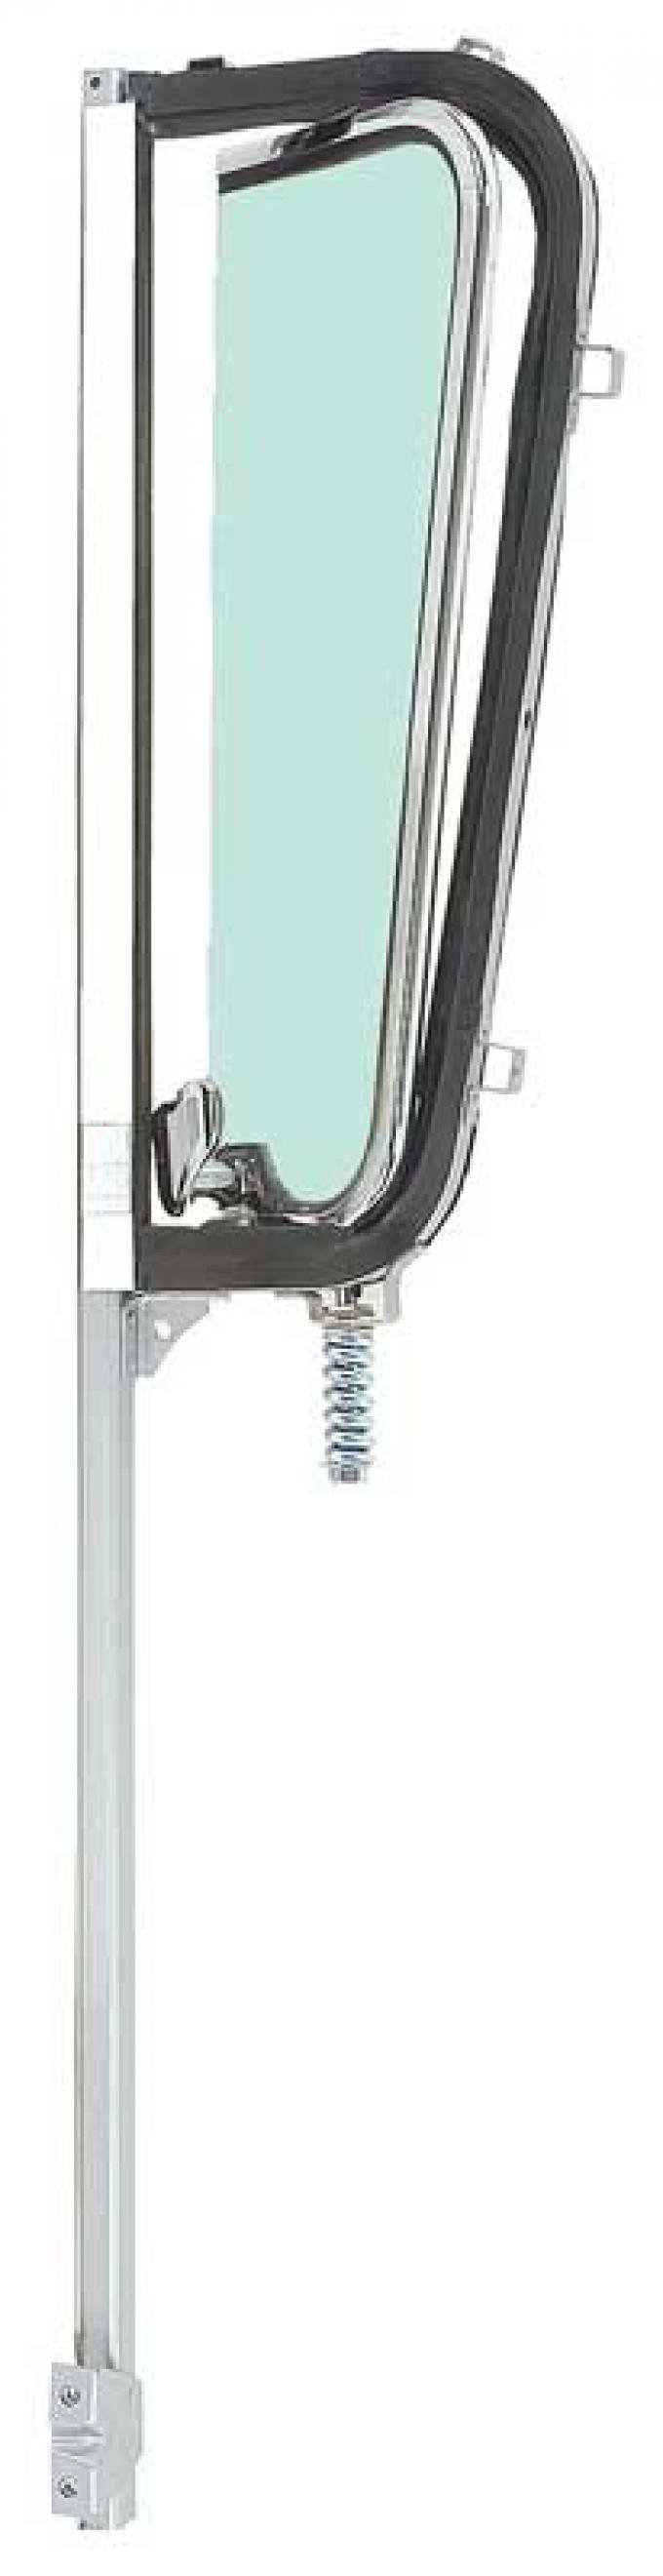 OER 1960-63 GM Truck Vent Window Assembly with Chrome Frame and Green Tinted Glass, LH CX4930T